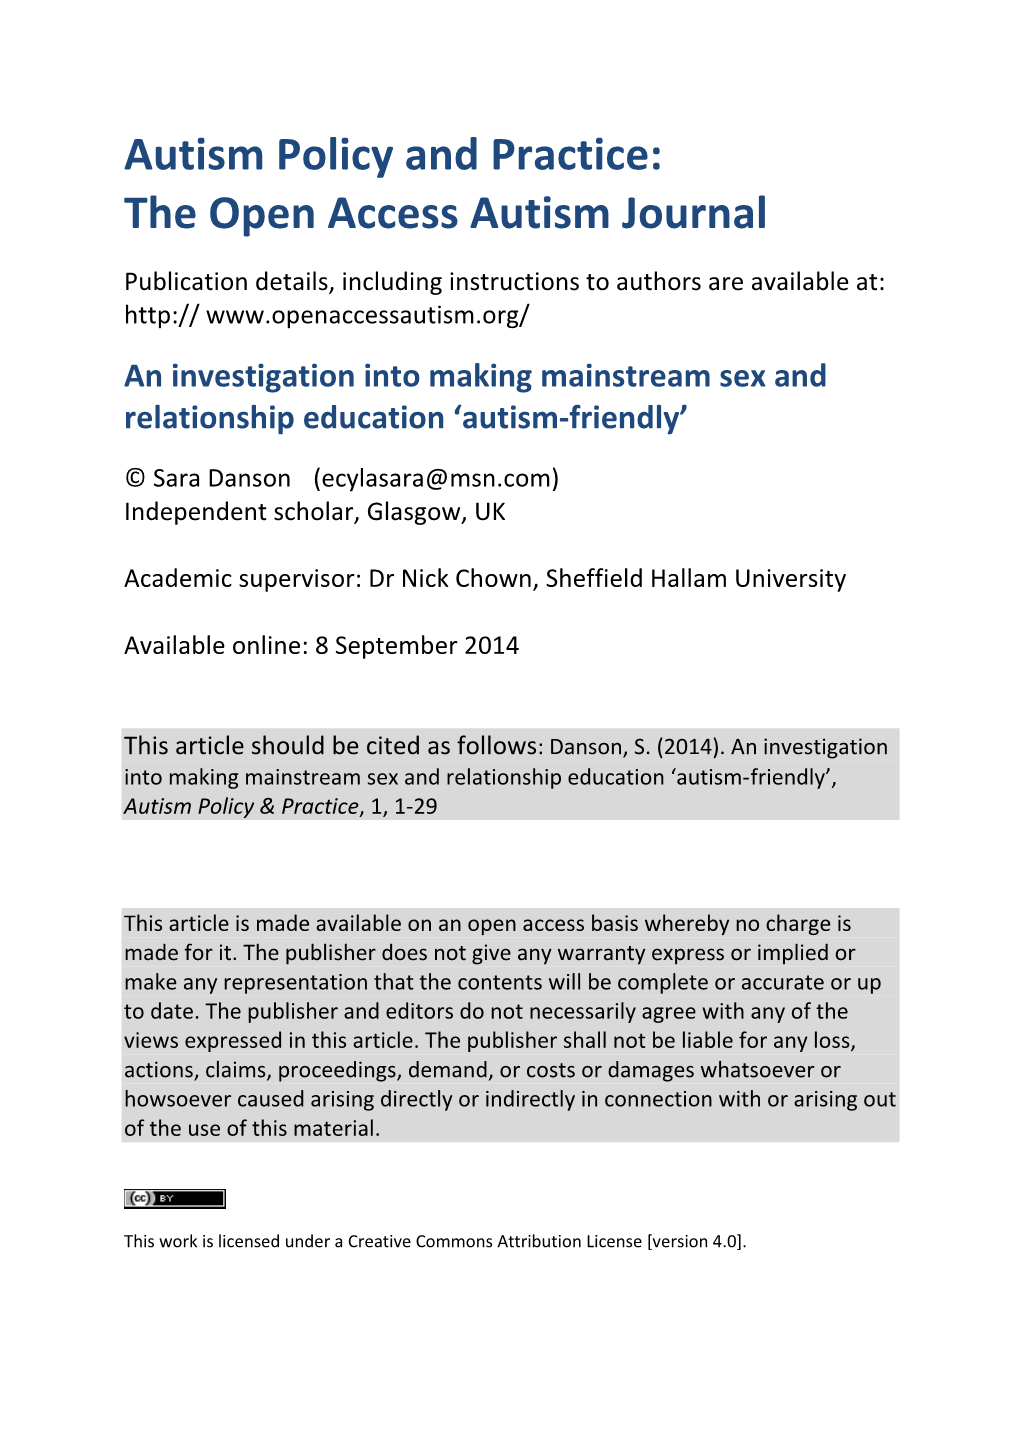 The Open Access Autism Journal